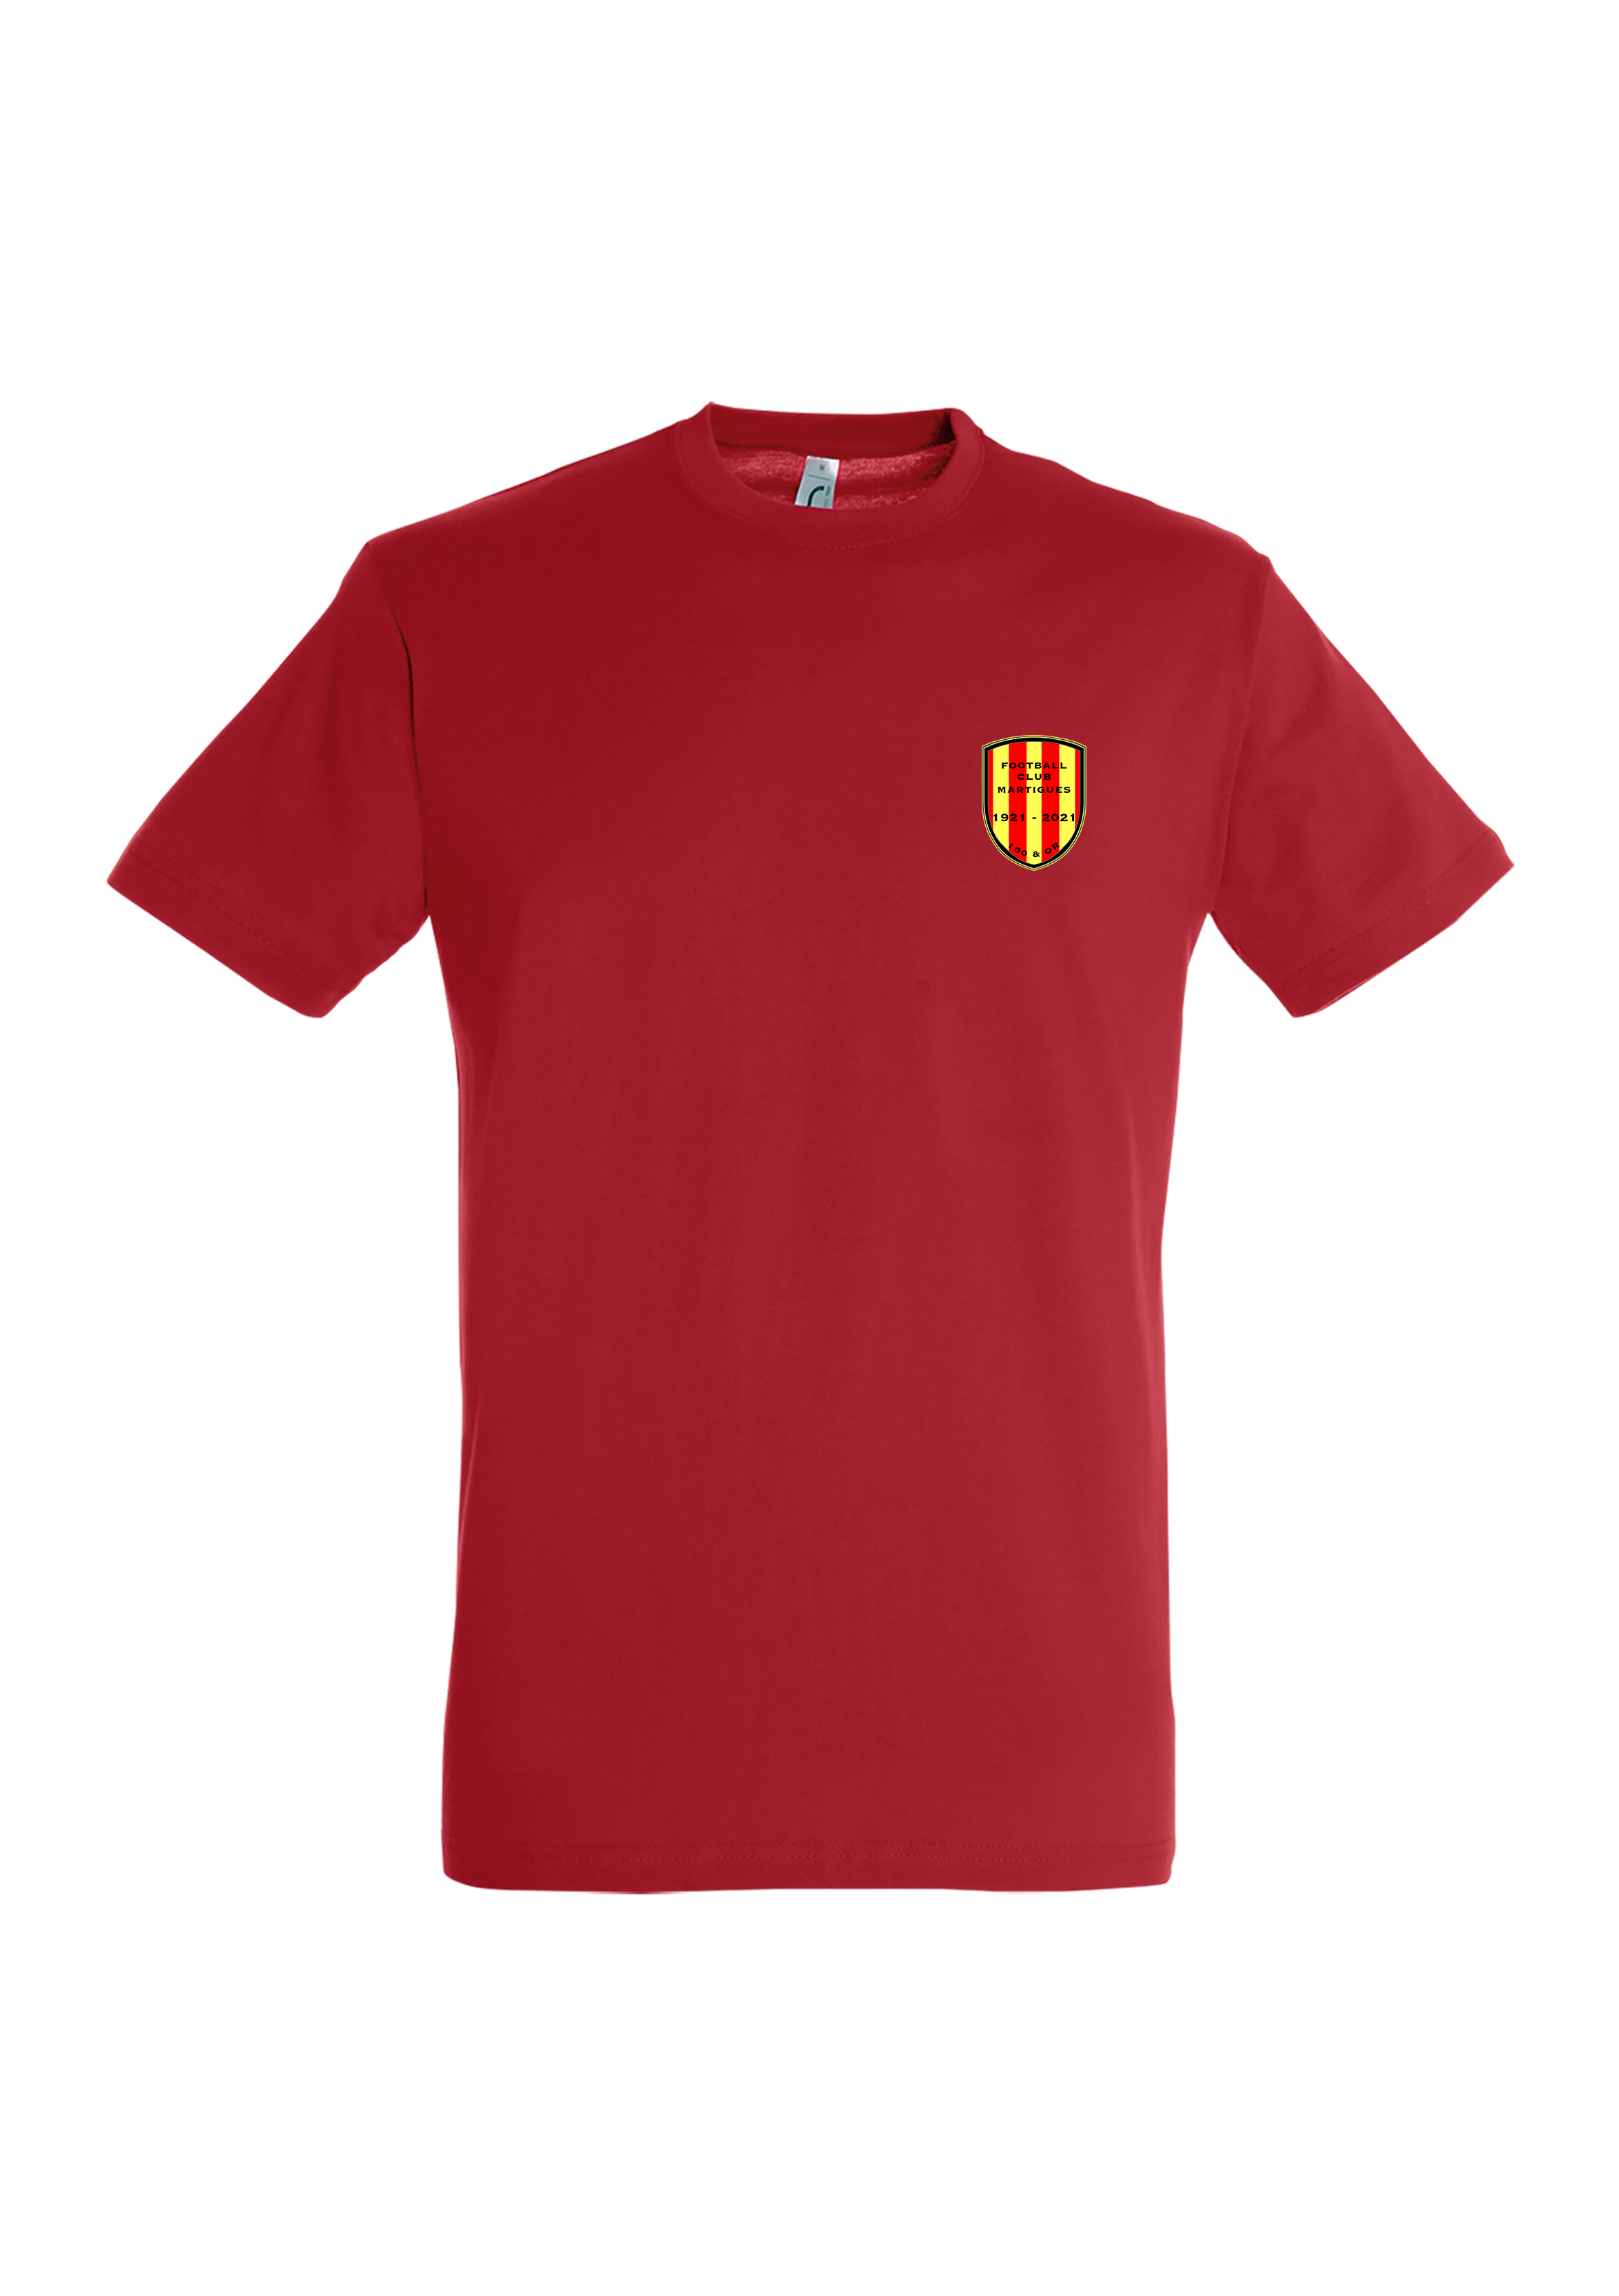 T-shirt Adulte Rouge "100 et Or" - n11380145A